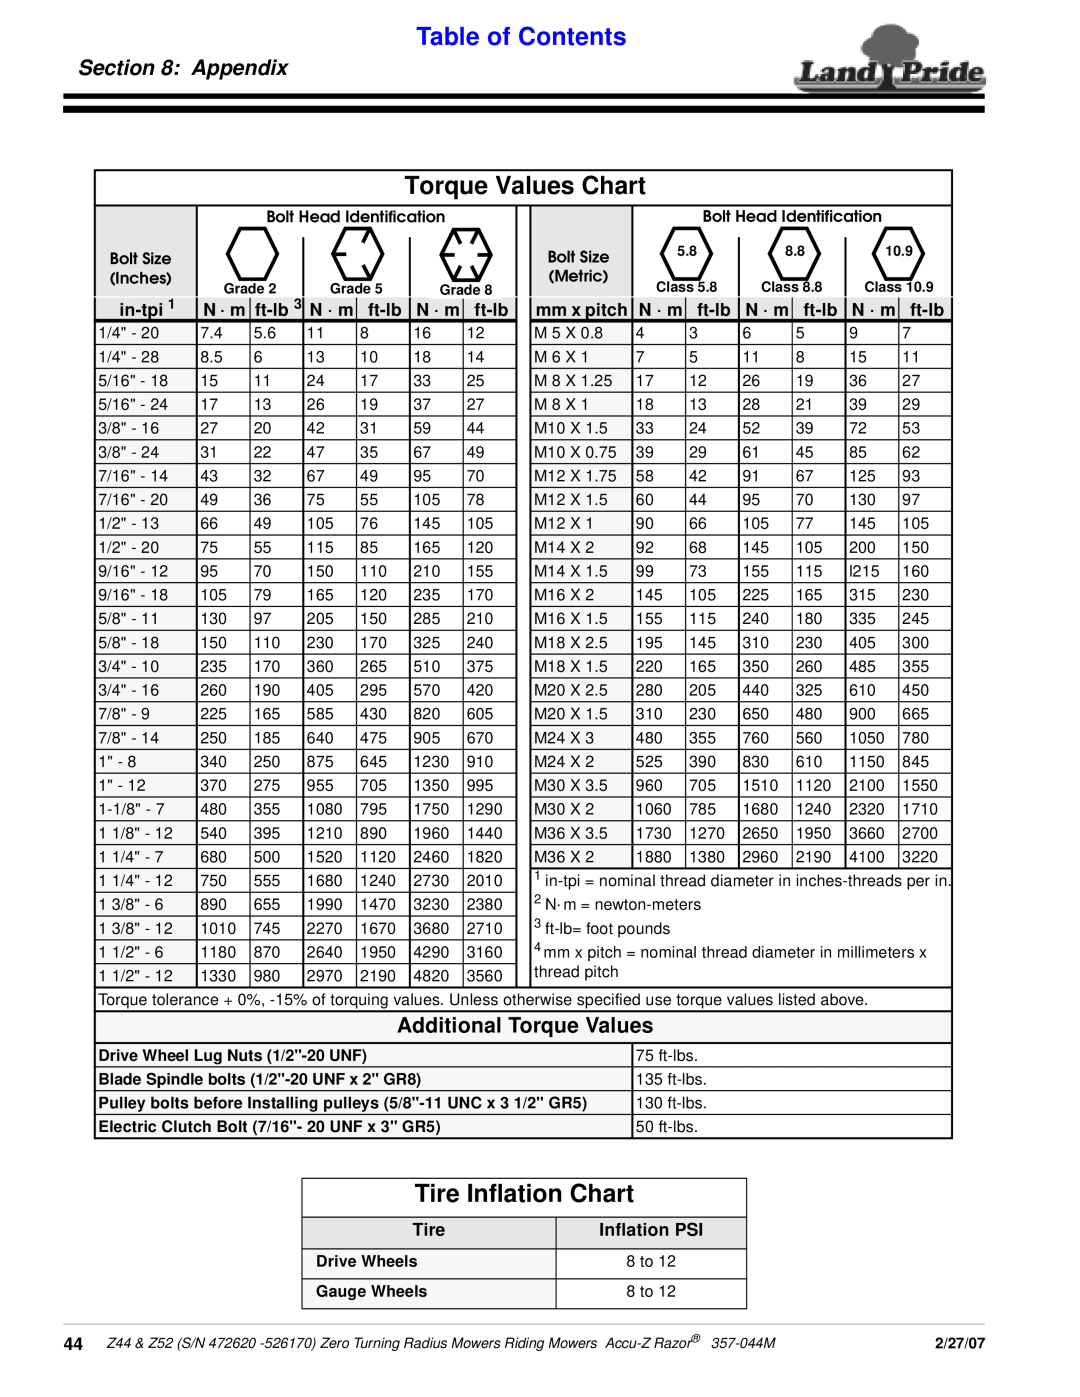 Land Pride 357-044M Torque Values Chart, Tire Inflation Chart, Appendix, Additional Torque Values, in-tpi, N · m, ft-lb 